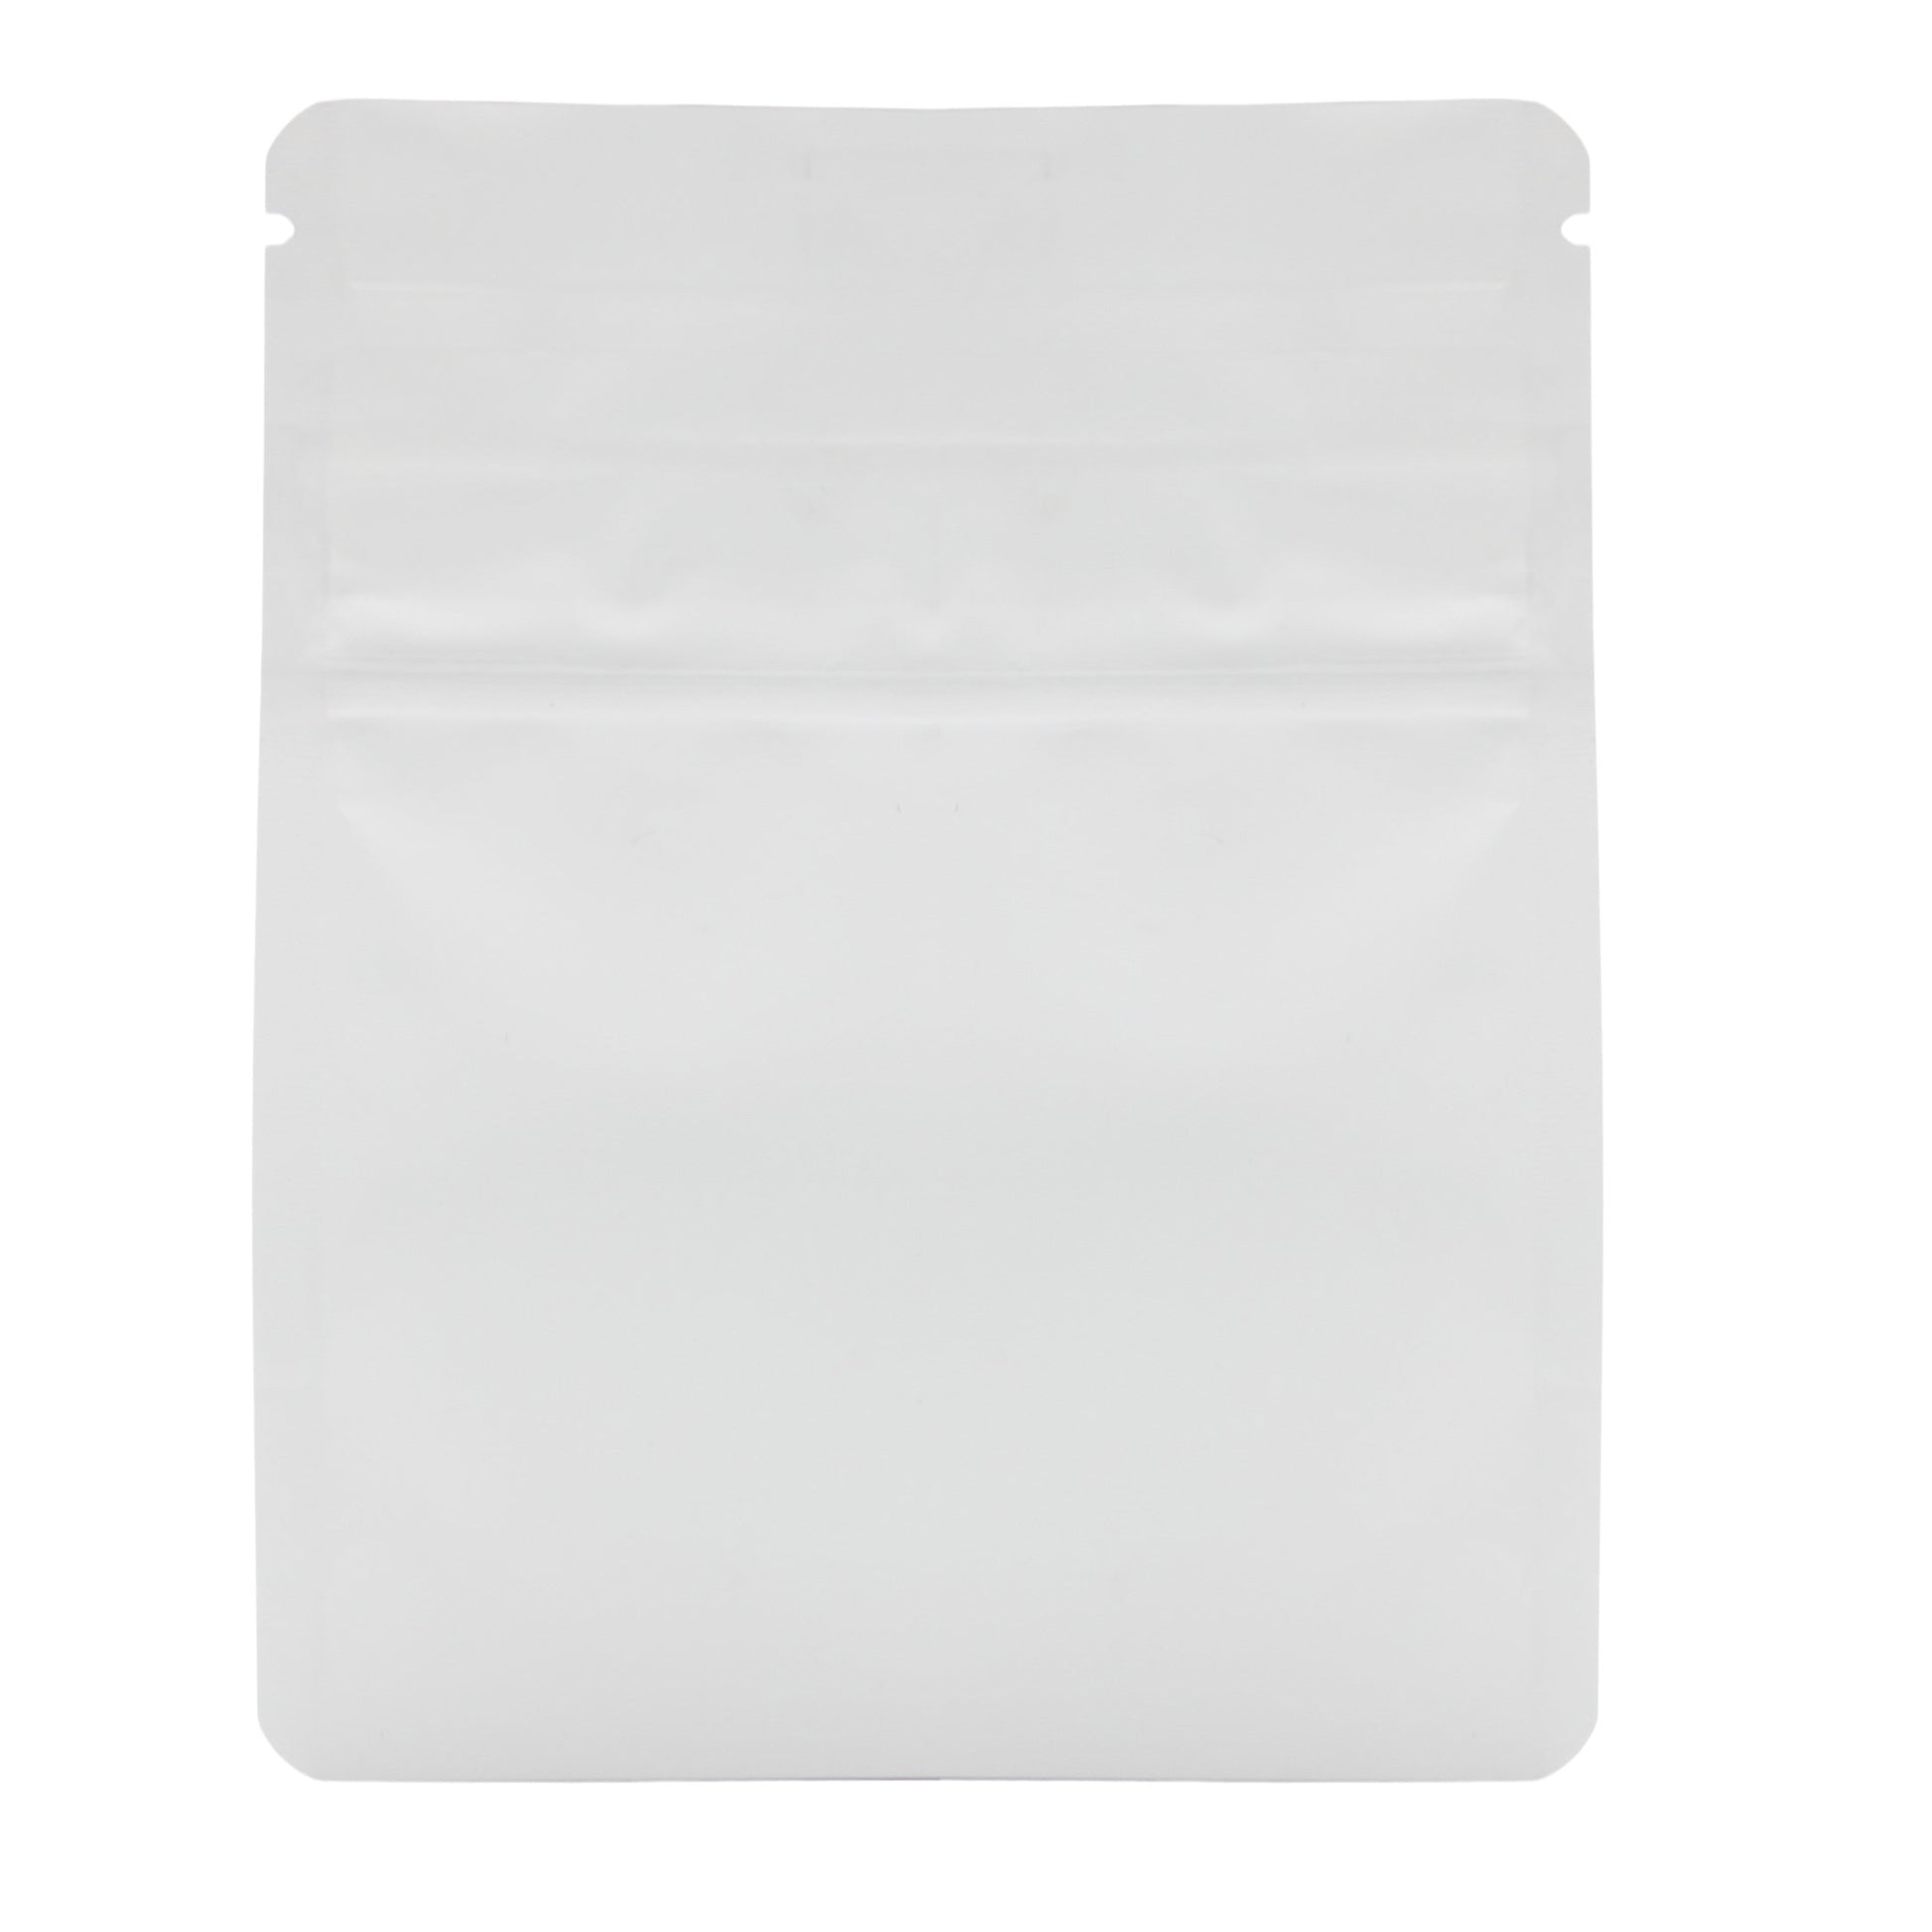 Bag King Child-Resistant Opaque Wide Mouth Bag (1/8th oz) 3.9" x 4.9" Matte White